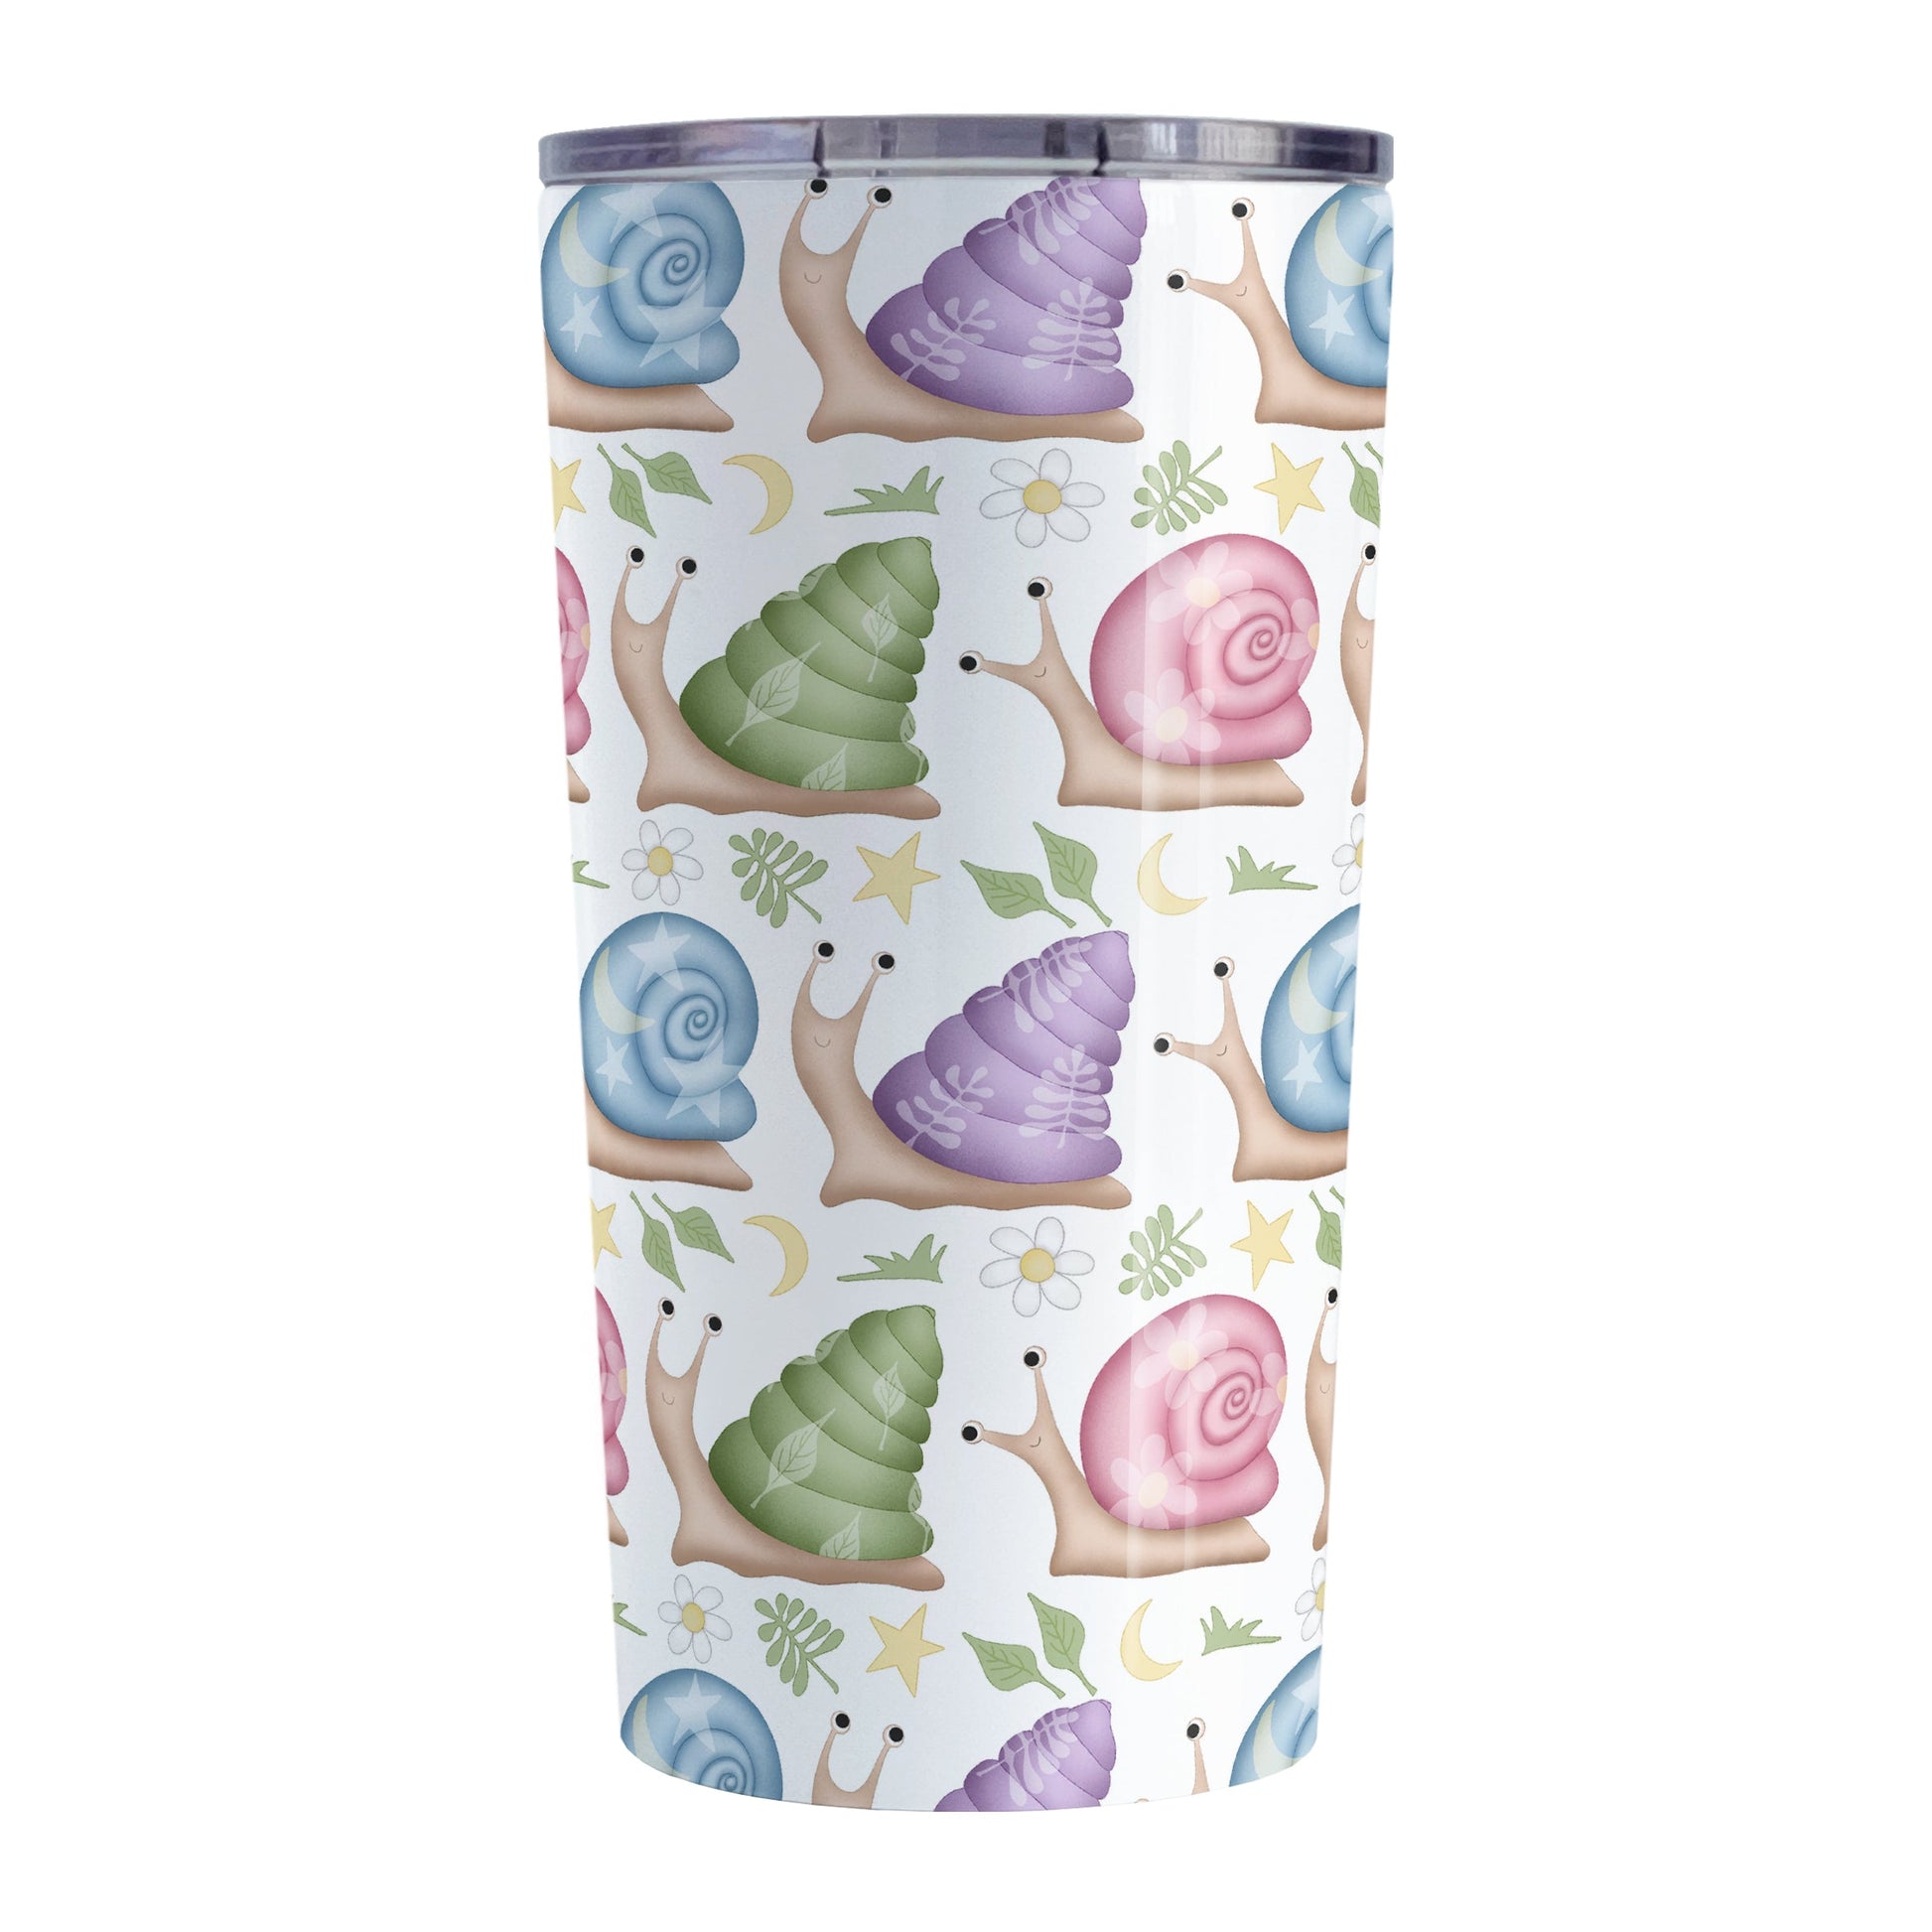 Cute Spring Summer Snails Pattern Tumbler Cup (20oz, stainless steel insulated) at Amy's Coffee Mugs. A cute snails tumbler cup with a whimsical pattern of snails with happy faces in rows around the cup with pink, purple, blue, and green shells floral and stars watermarks, with foliage, moons, and stars between the rows.